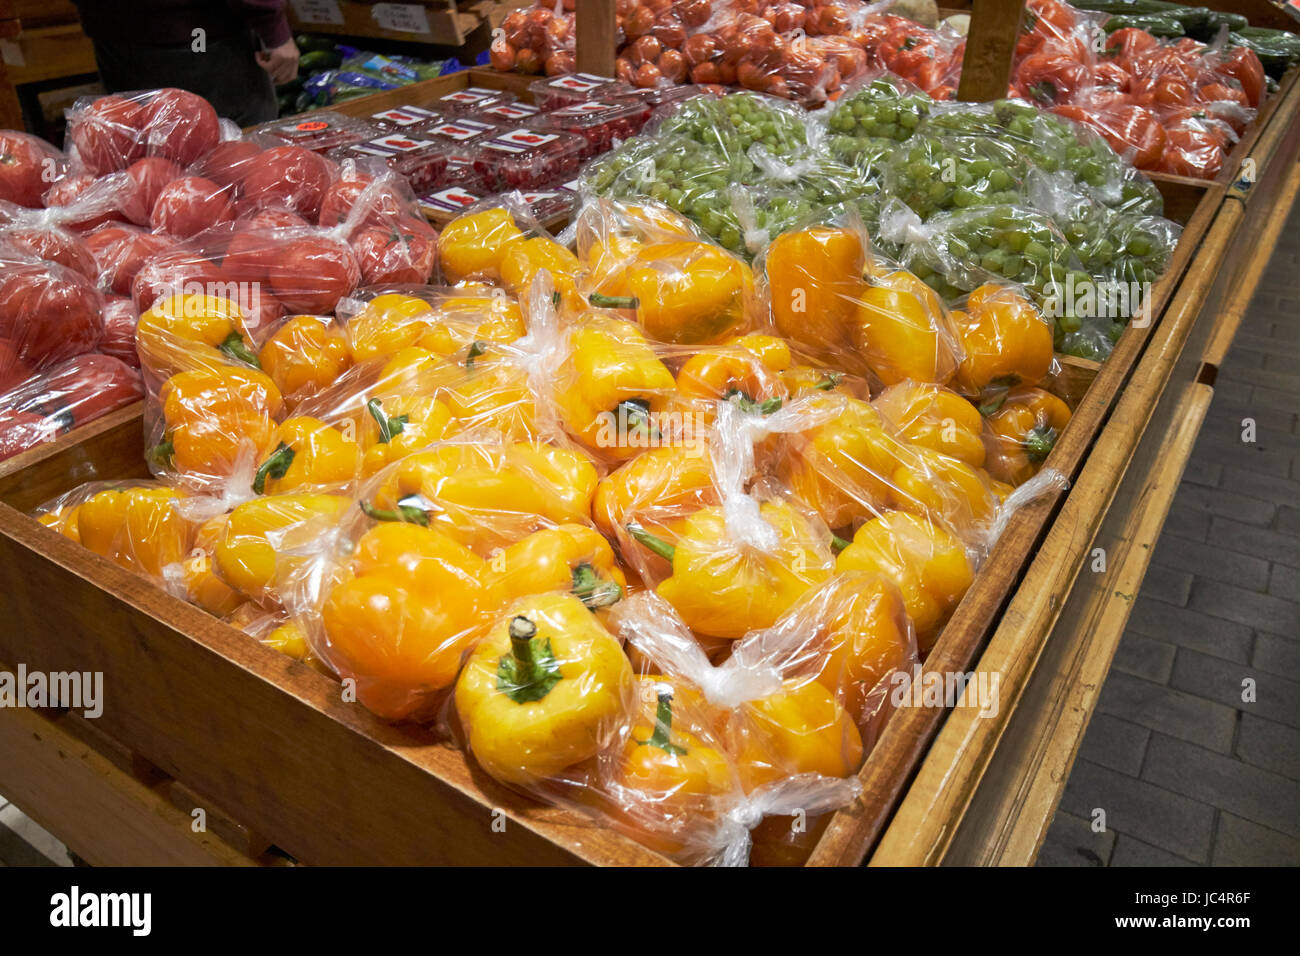 bagged peppers and fruits at reading terminal market food court Philadelphia USA Stock Photo